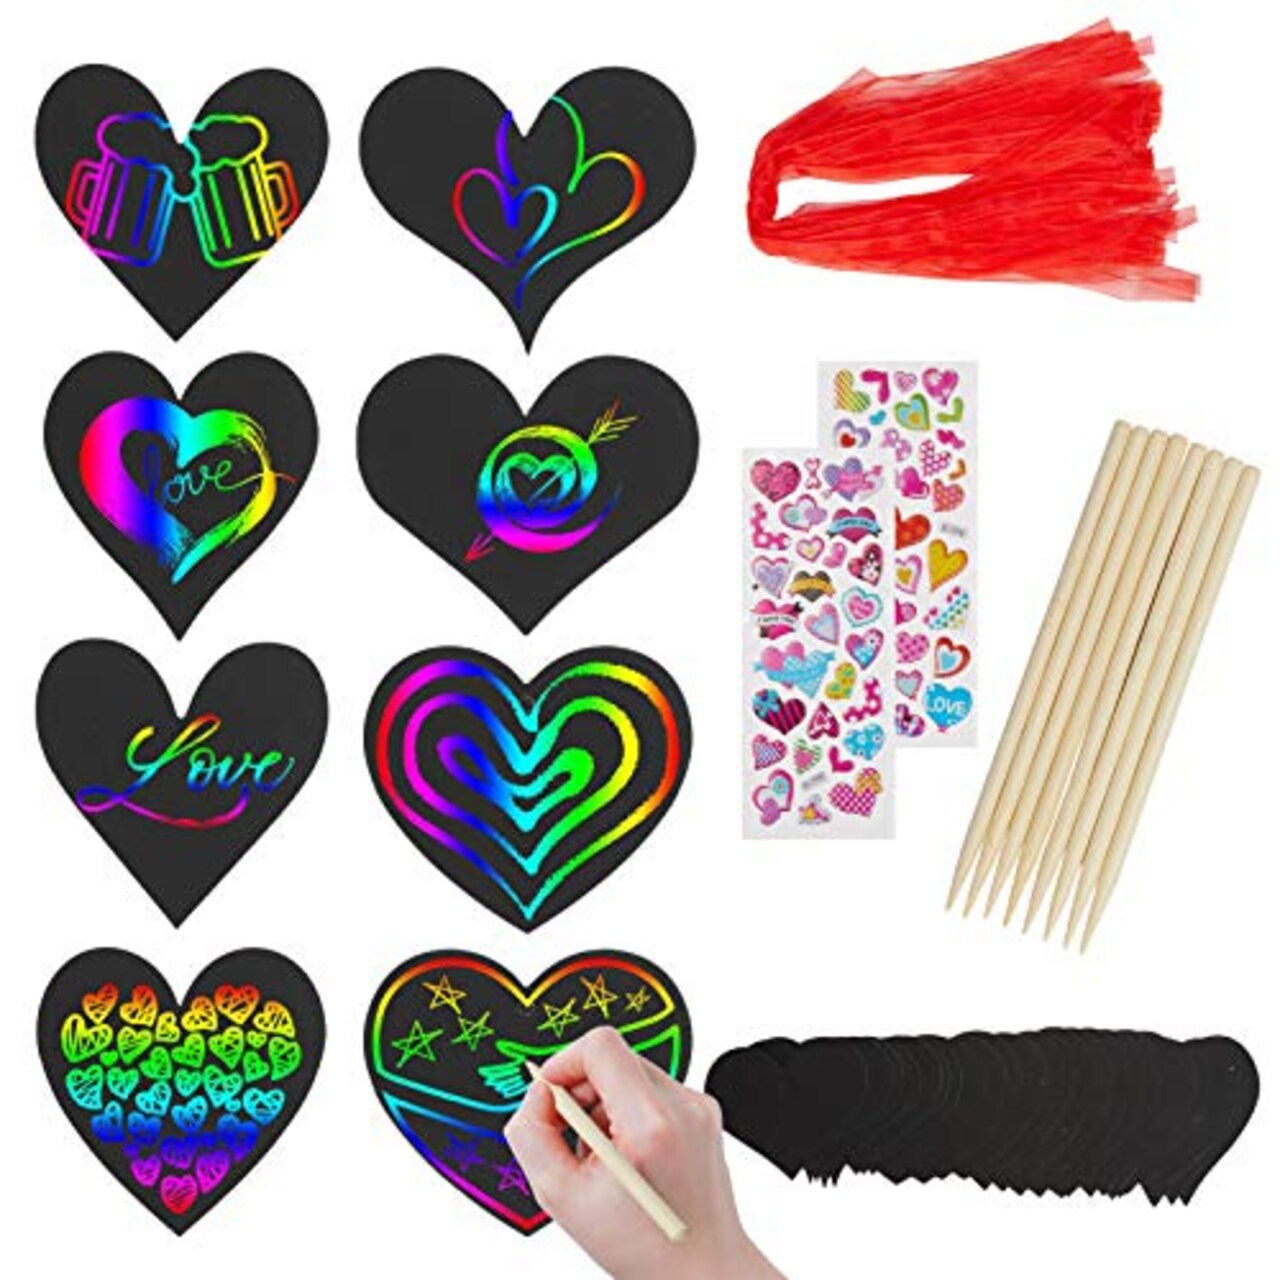 Rainbow Magic Scratch Art Set, 28 Heart Scratch Paper with Ribbons for  Valentines Decorations, Scratch Art for Kids Class with 2Pcs 3D Stickers,  Valentines Day Gifts for Kids (28 PCS Valentine Craft)